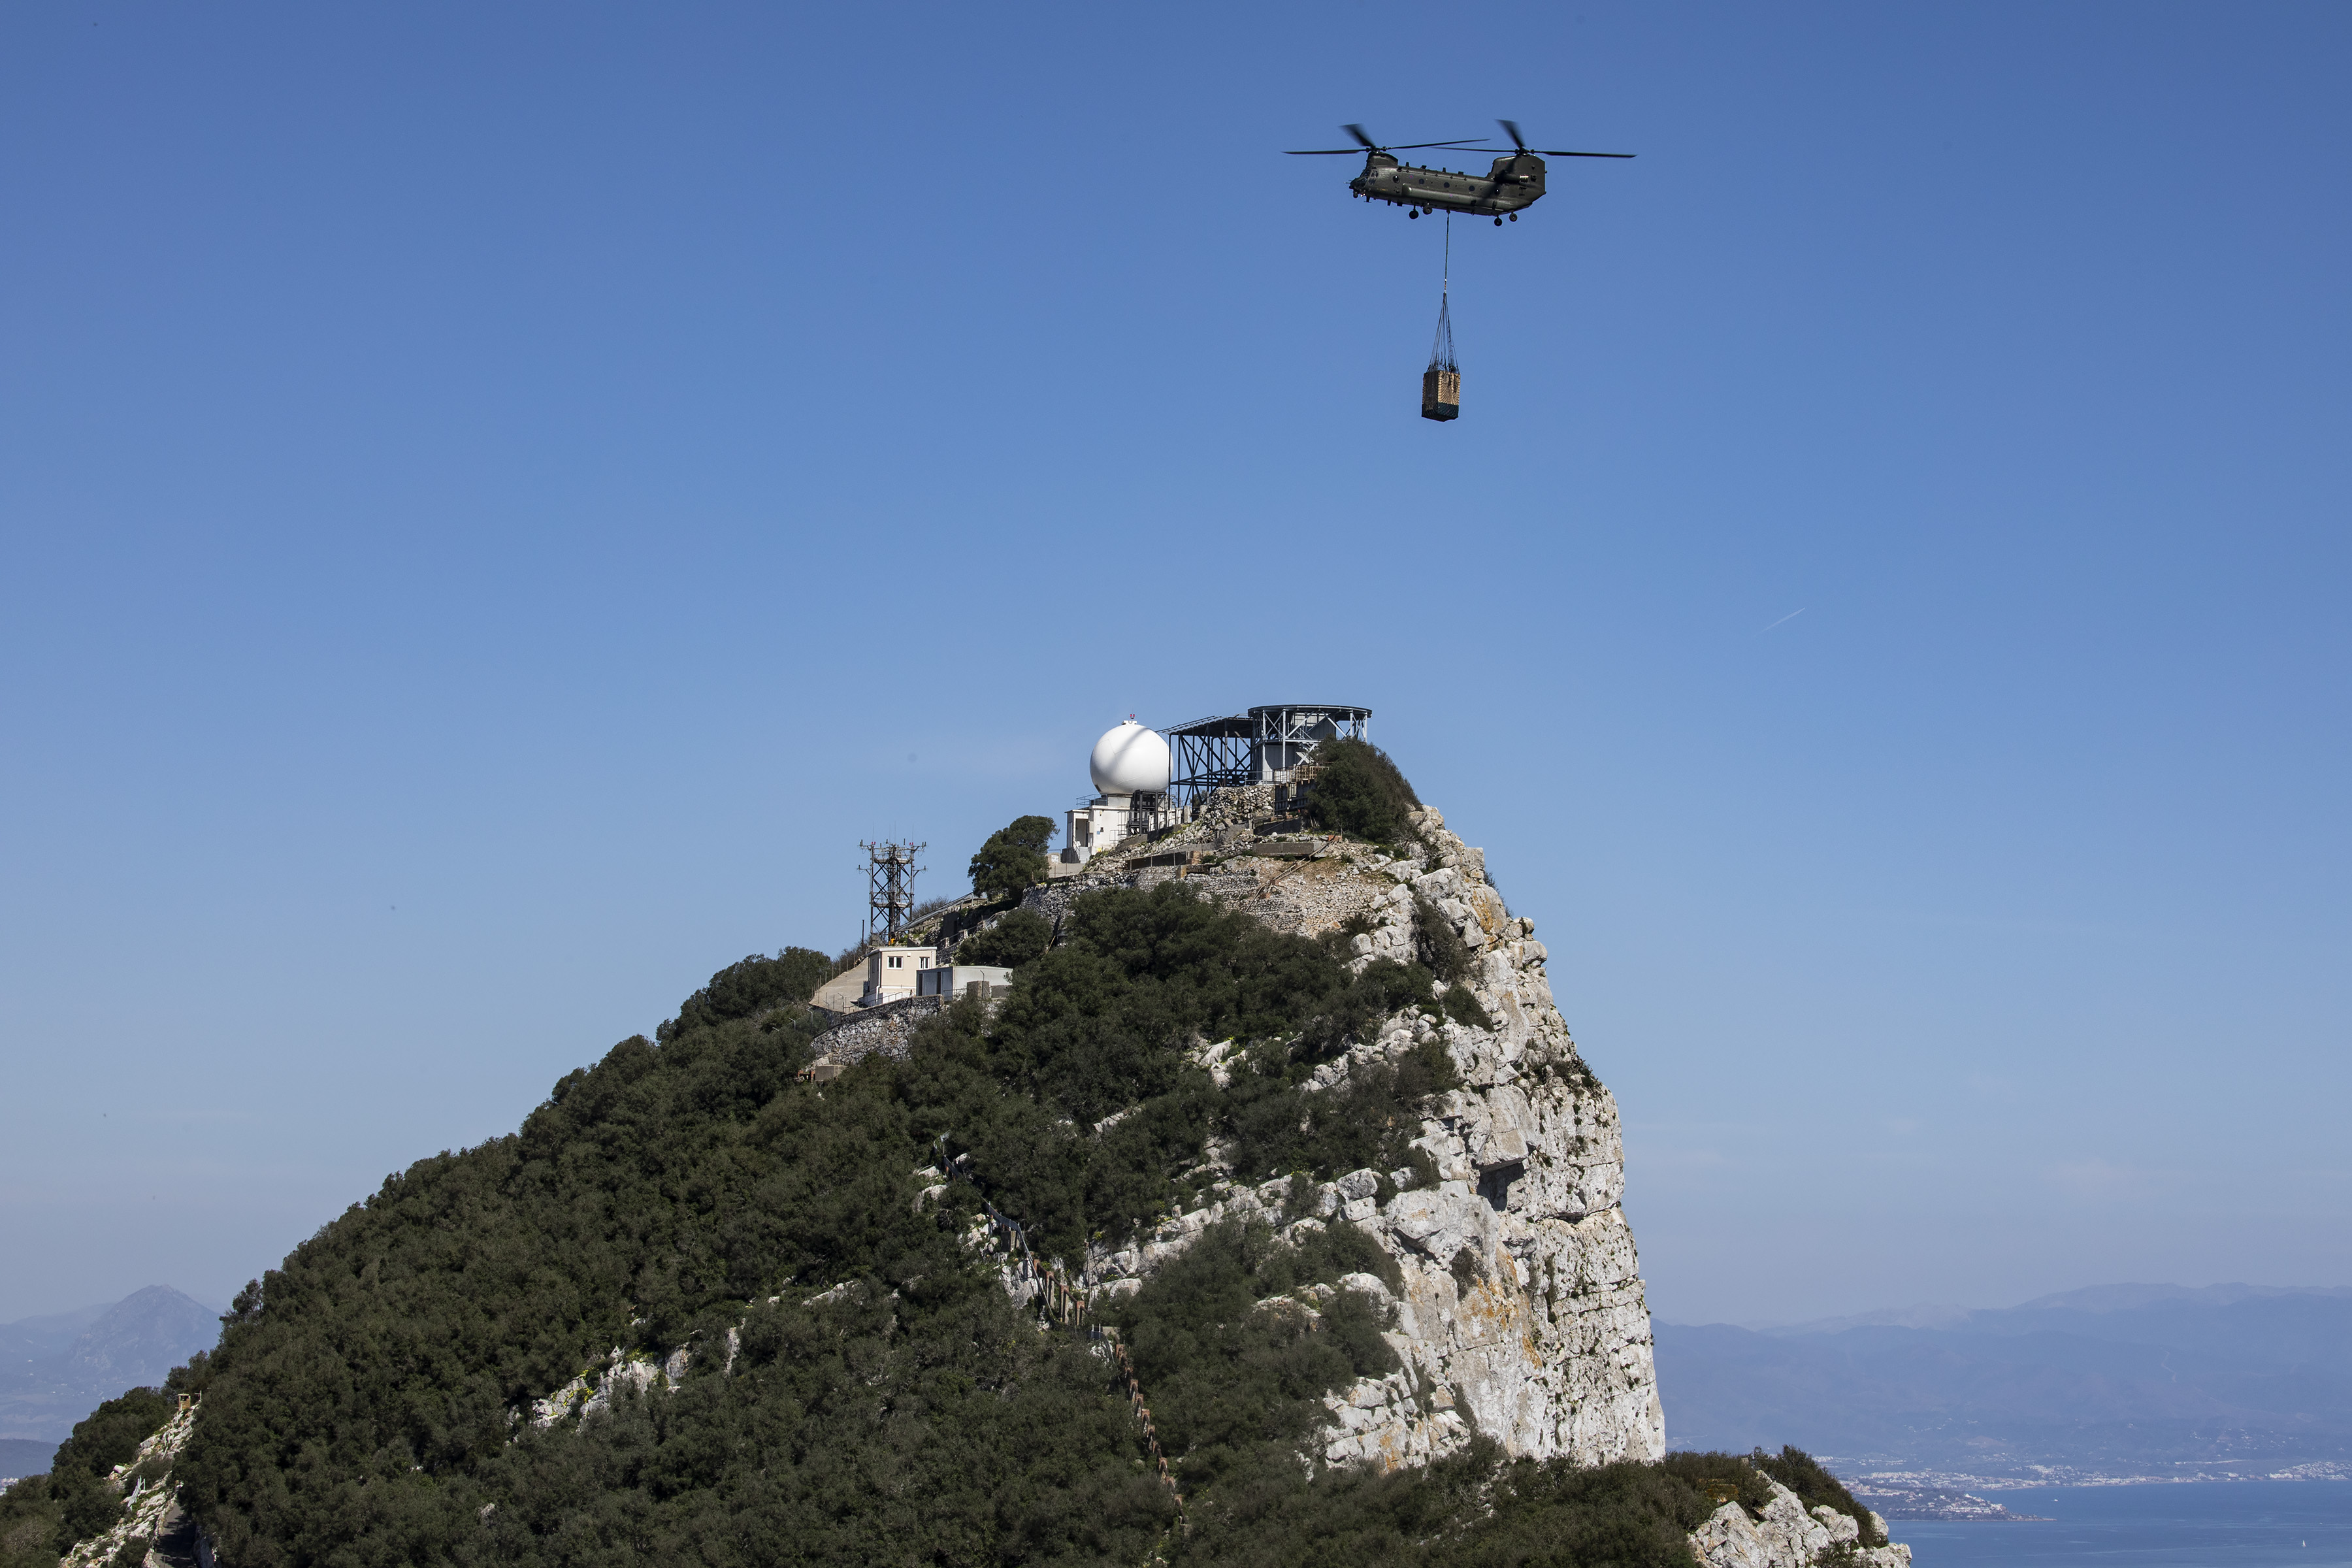 Chinook carries loaded sling over the Rock of Gibraltar.